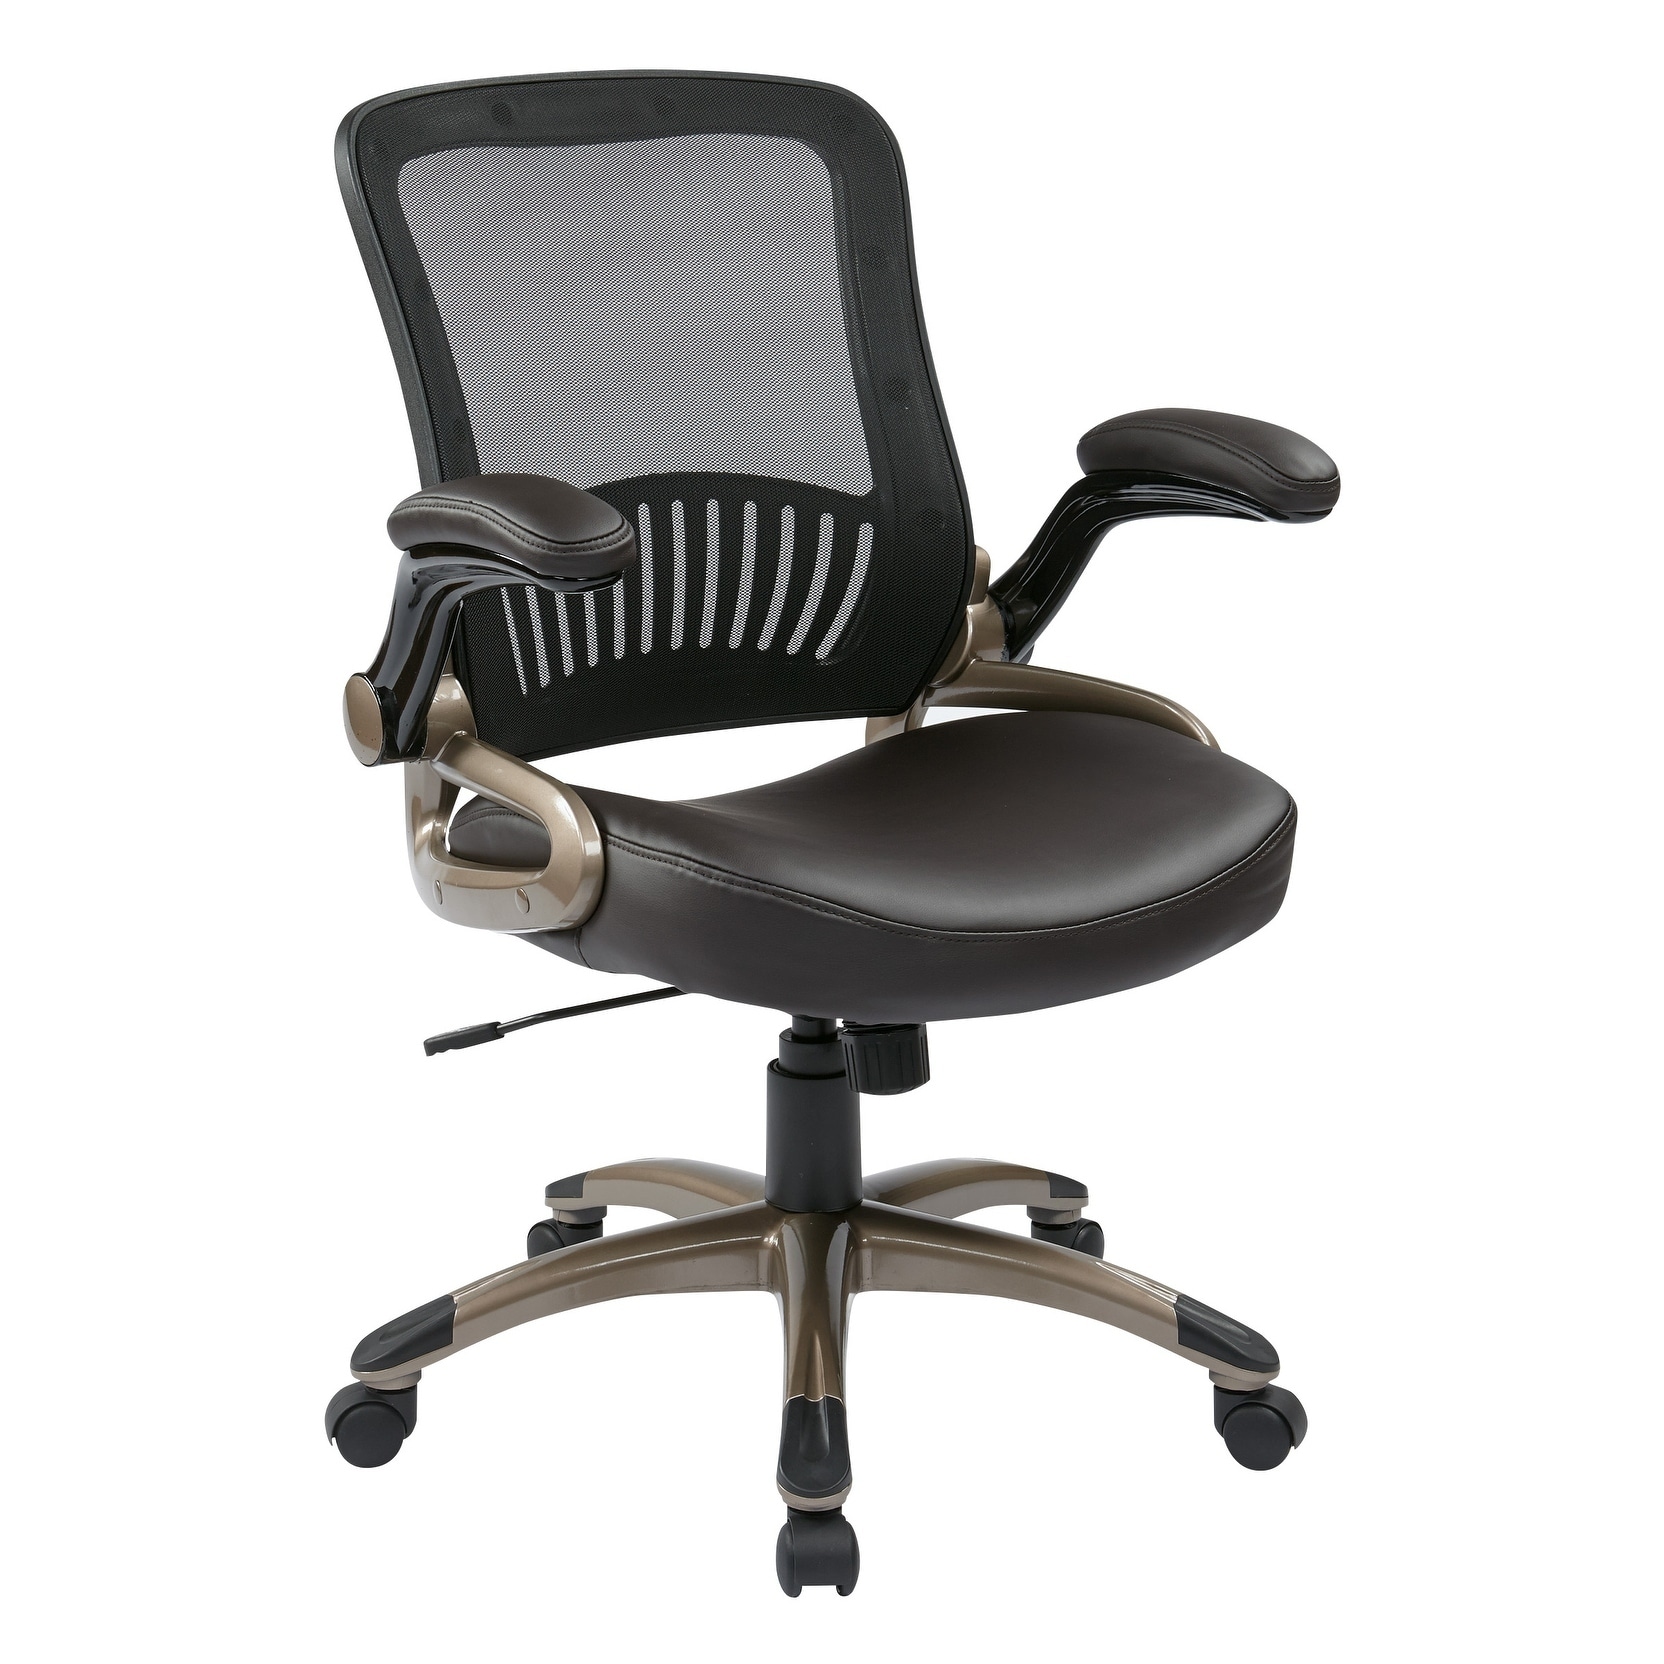 Screen Back Espresso Bonded Leather Seat Office Chair Overstock 23607658